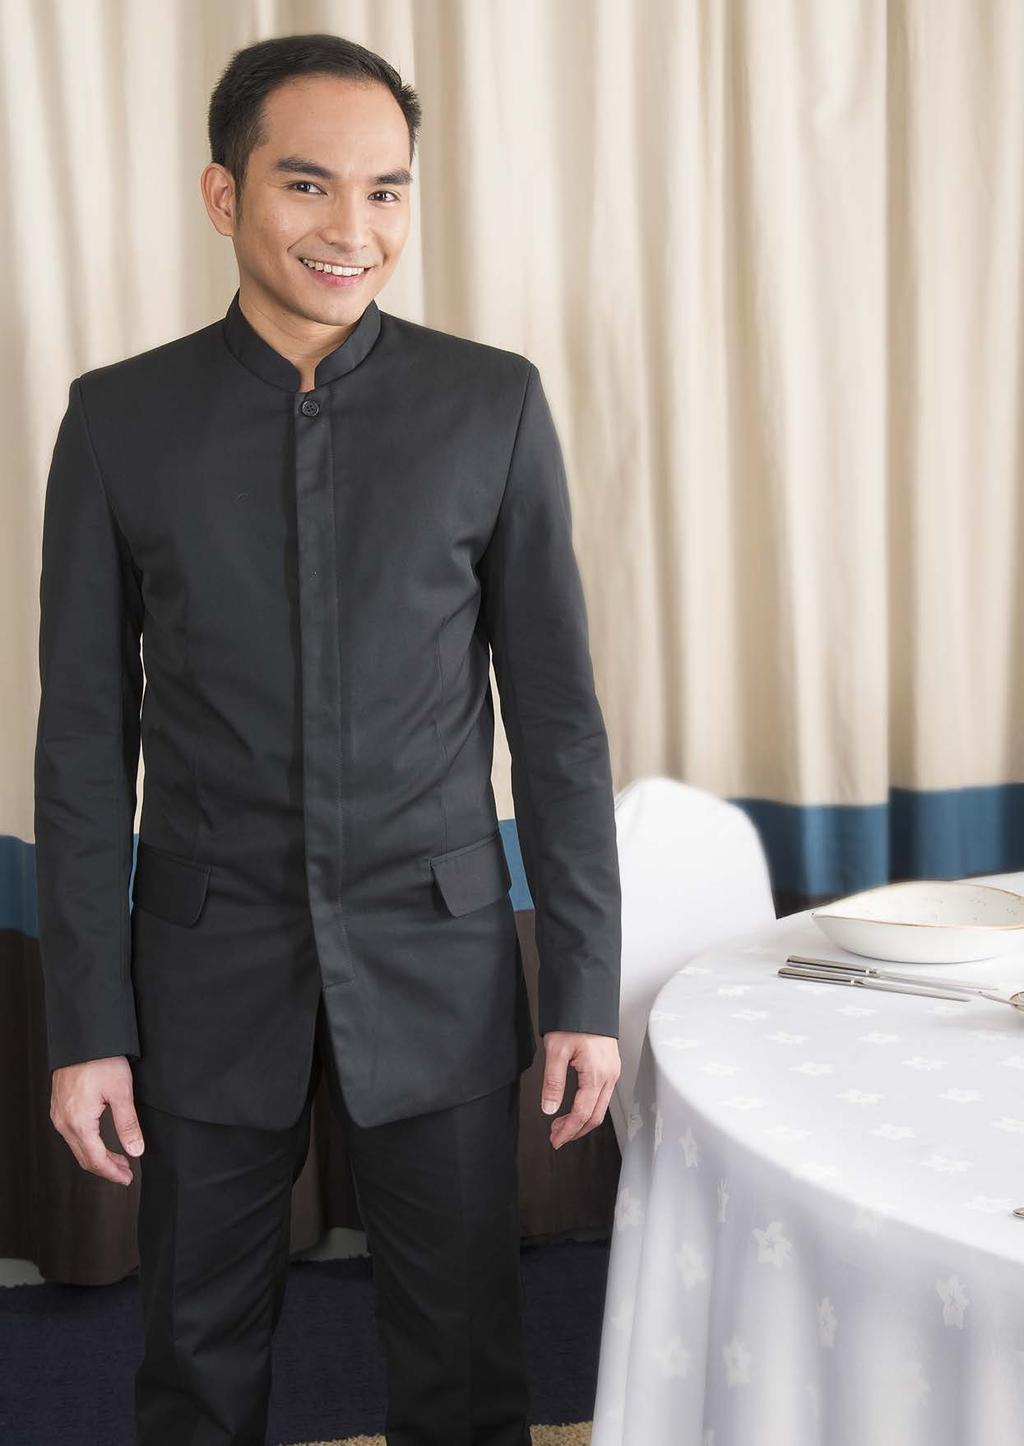 1 1 LEAMINGTON Male Banqueting Jacket Single breasted, Concealed button fastening, Front pockets, Rear vent, Internal pockets, Lined, Black.